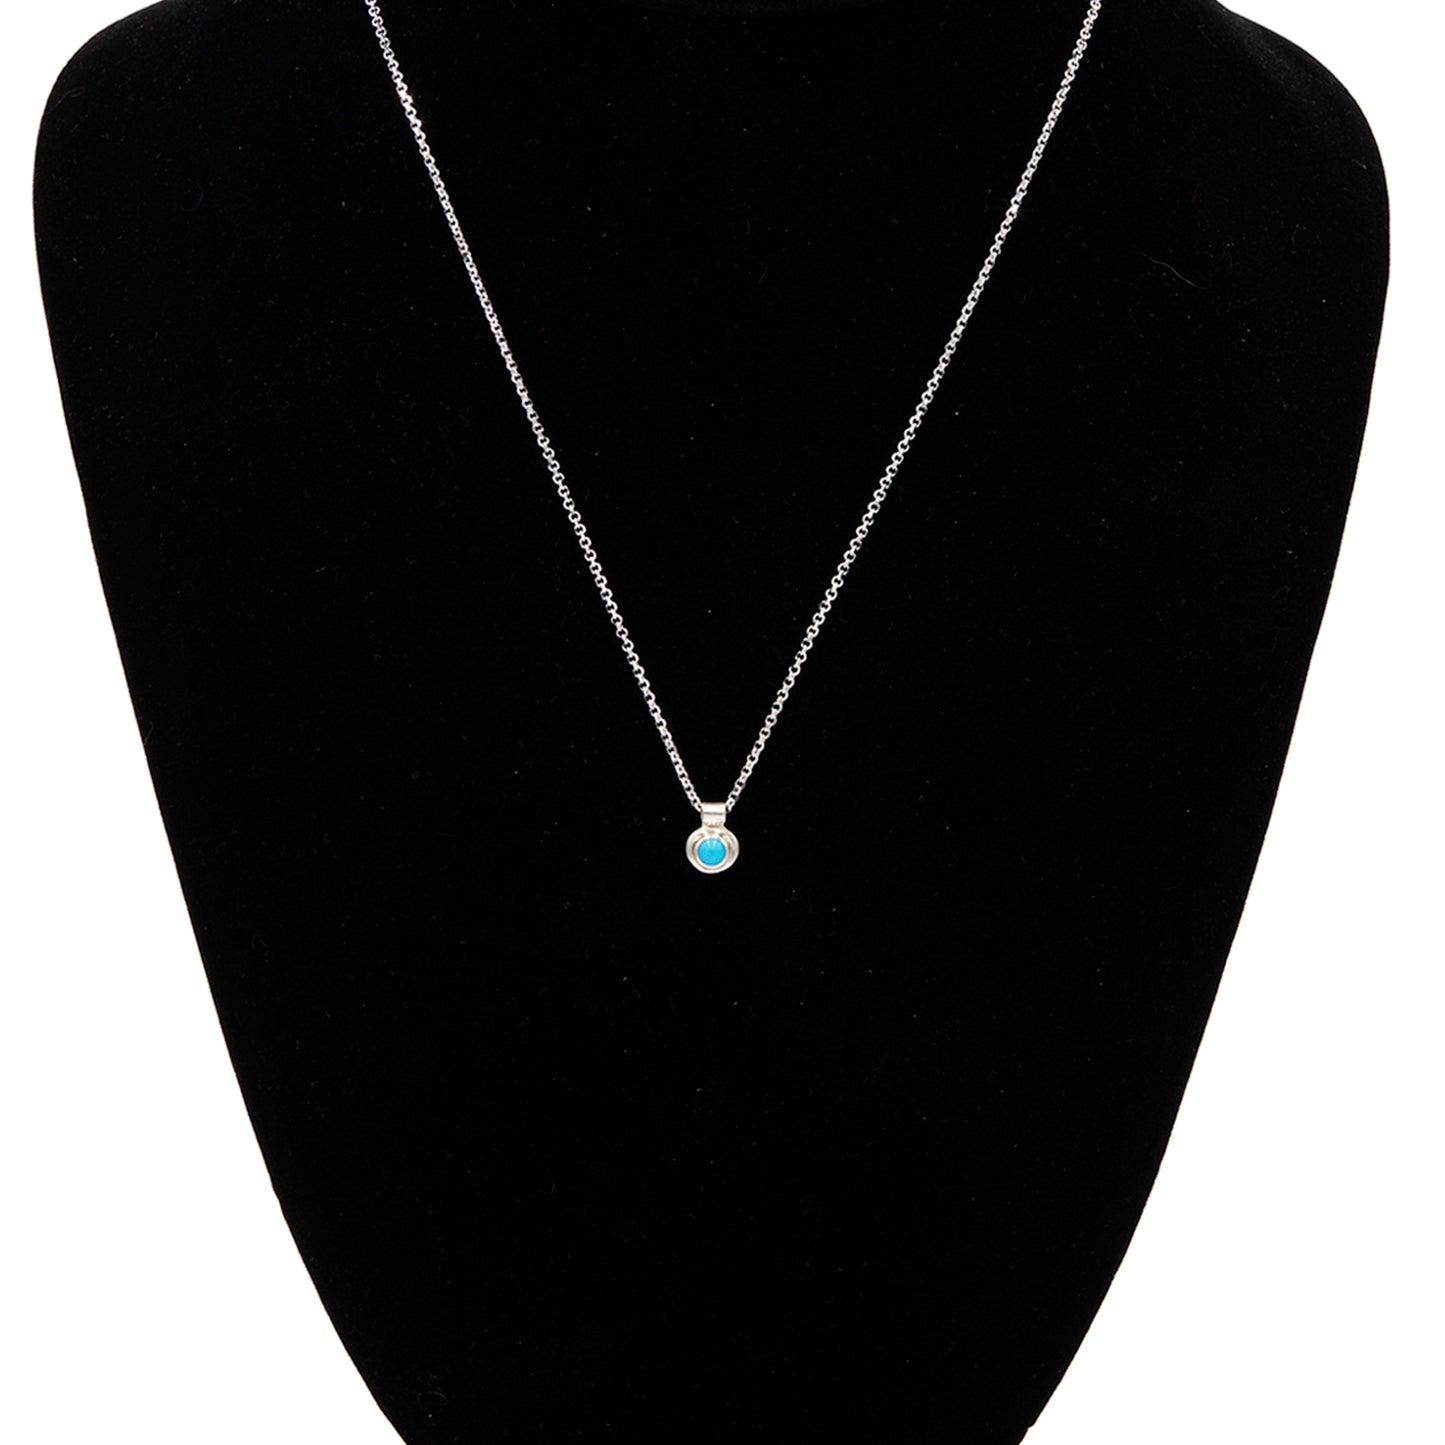 4mm Turquoise Nugget Necklace